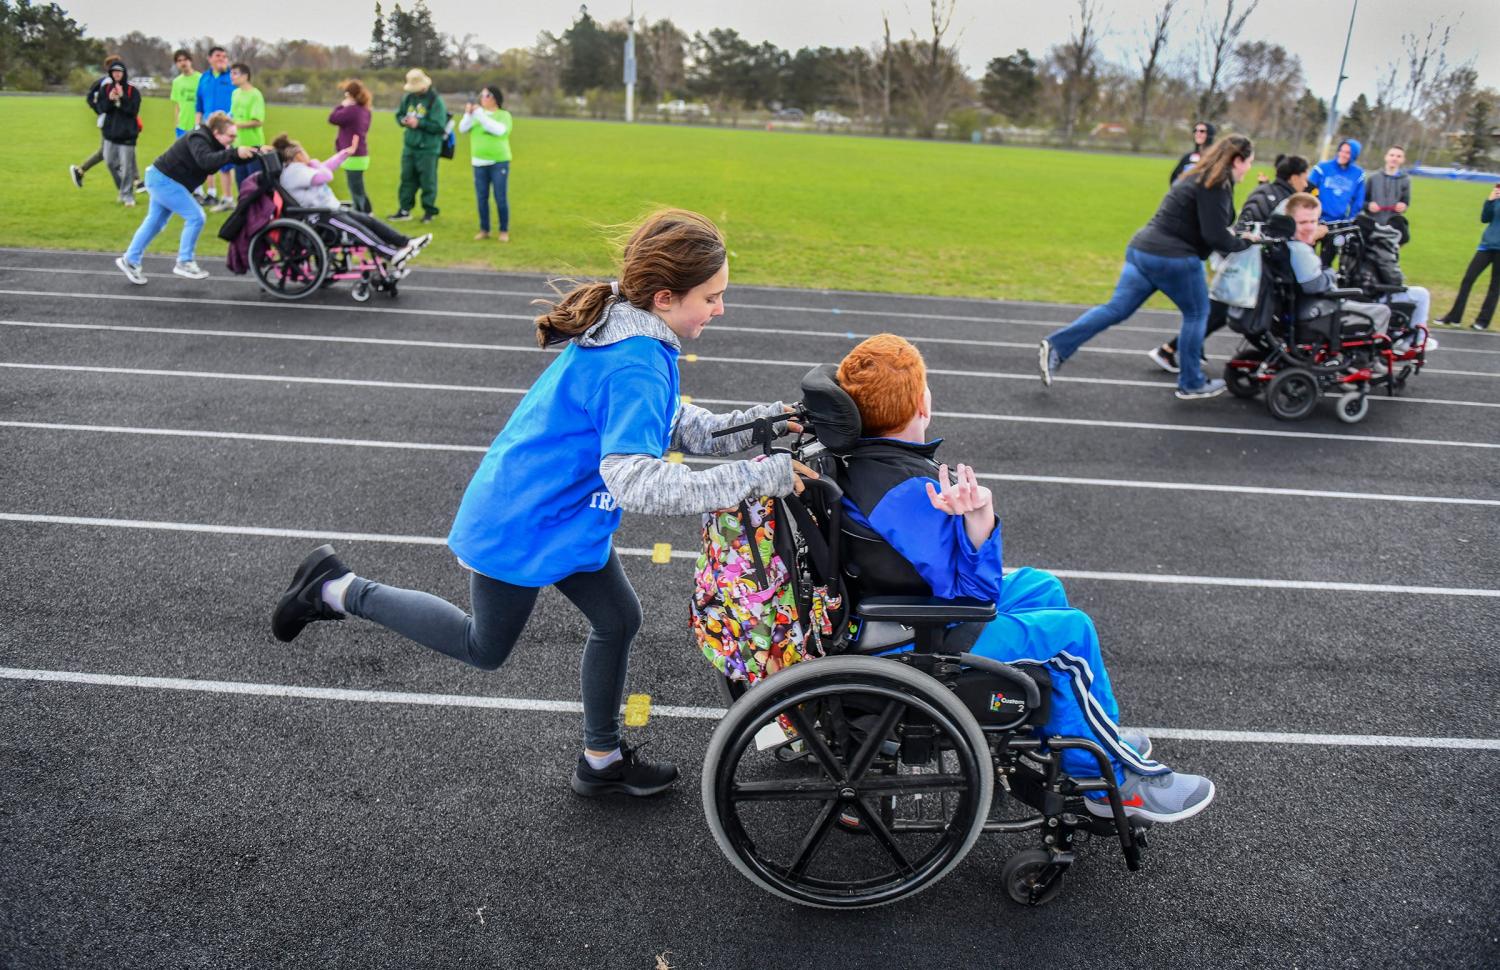 Competitors in wheelchairs get some assistance around the track during the Developmental Adapted Physical Education track meet Friday, May 10, at Apollo High School. Students from St. Cloud junior and high schools, Sartell, Sauk Rapids and Foley students took part in the area event, the first of its kind at Apollo.Poy 27